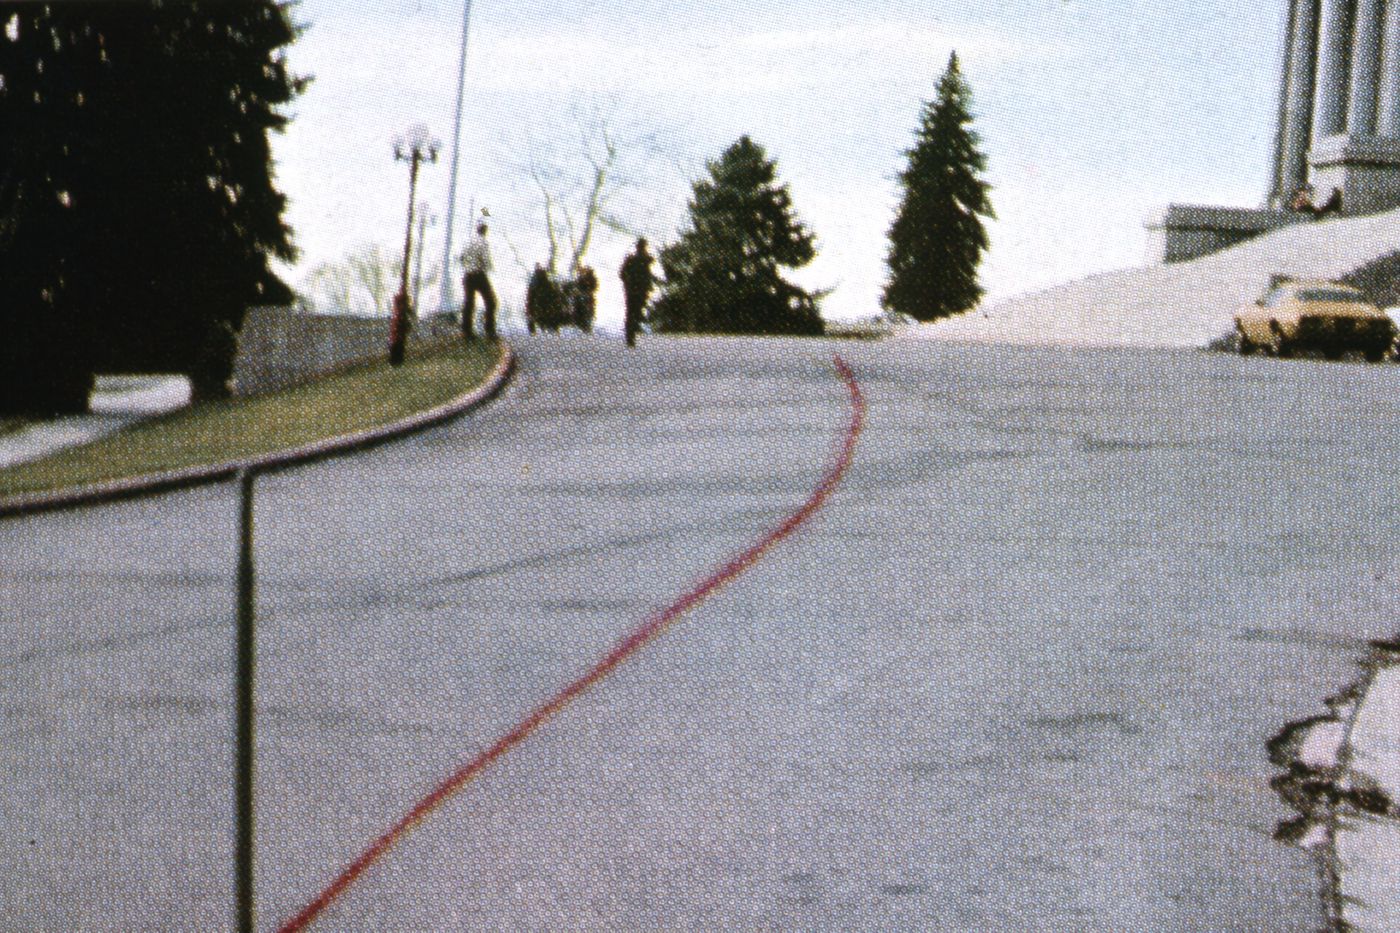 Photograph showing line on road for Red Line